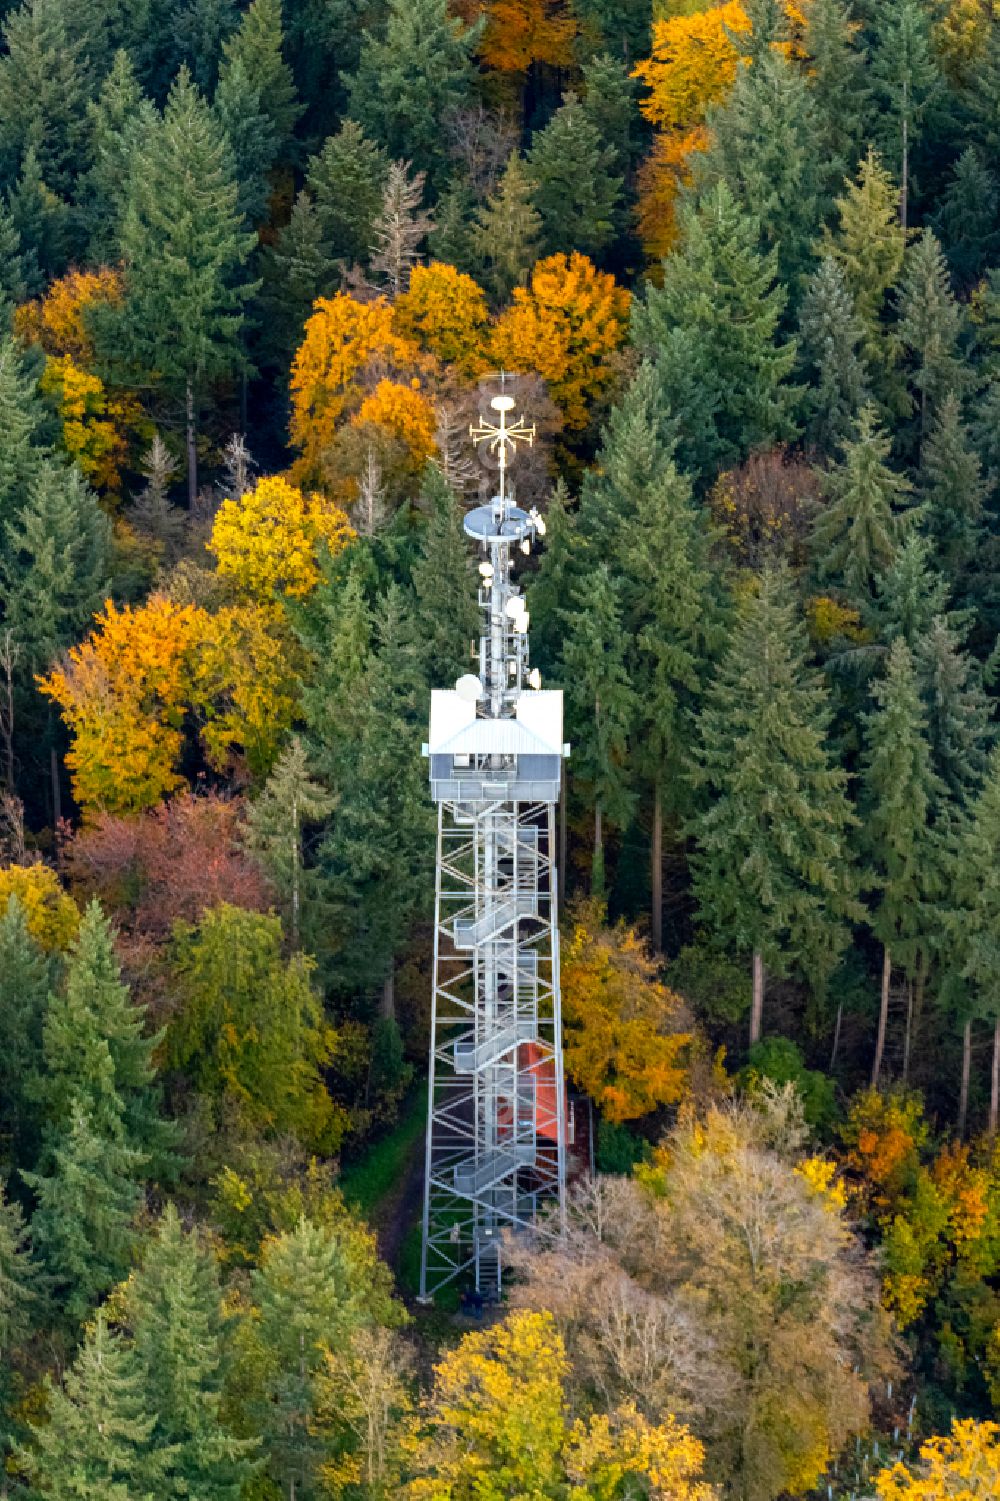 Eichstetten am Kaiserstuhl from the bird's eye view: Autumnal discolored vegetation view structure of the observation tower Eichelspitzturm in Eichstetten am Kaiserstuhl in the state Baden-Wurttemberg, Germany